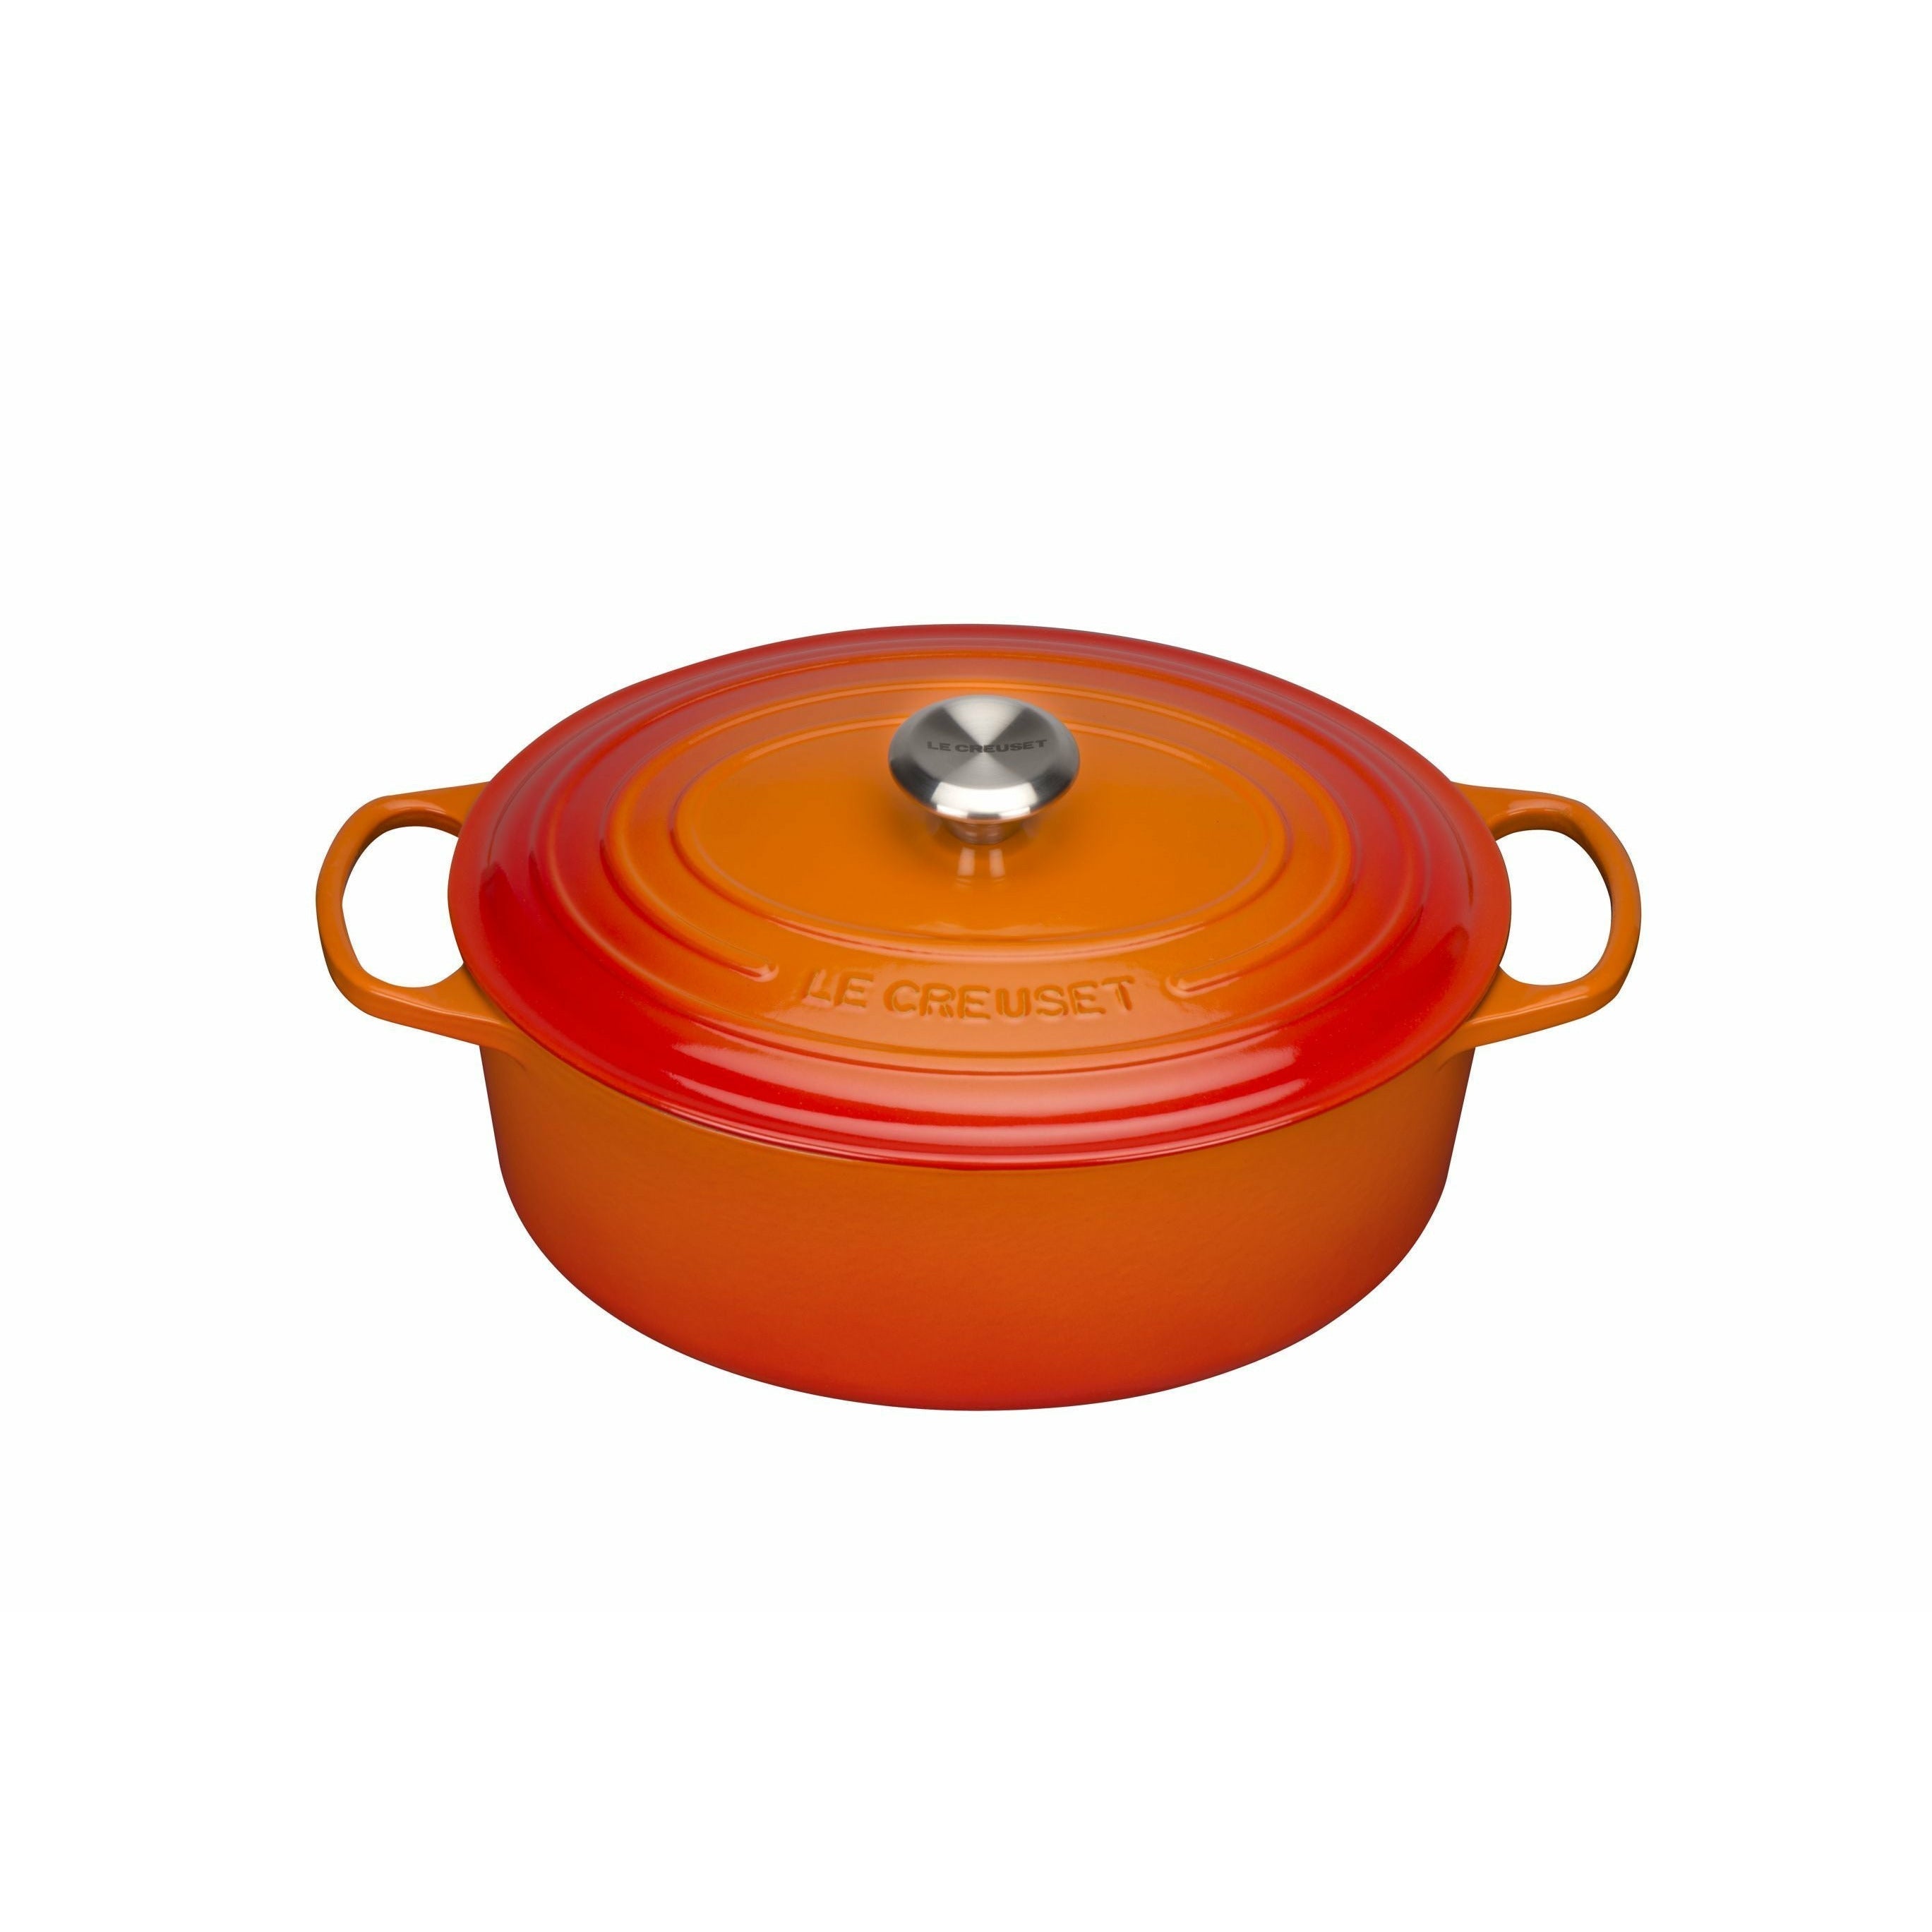 Le Creuset Signature Oval Roaster 31 Cm, Oven Red